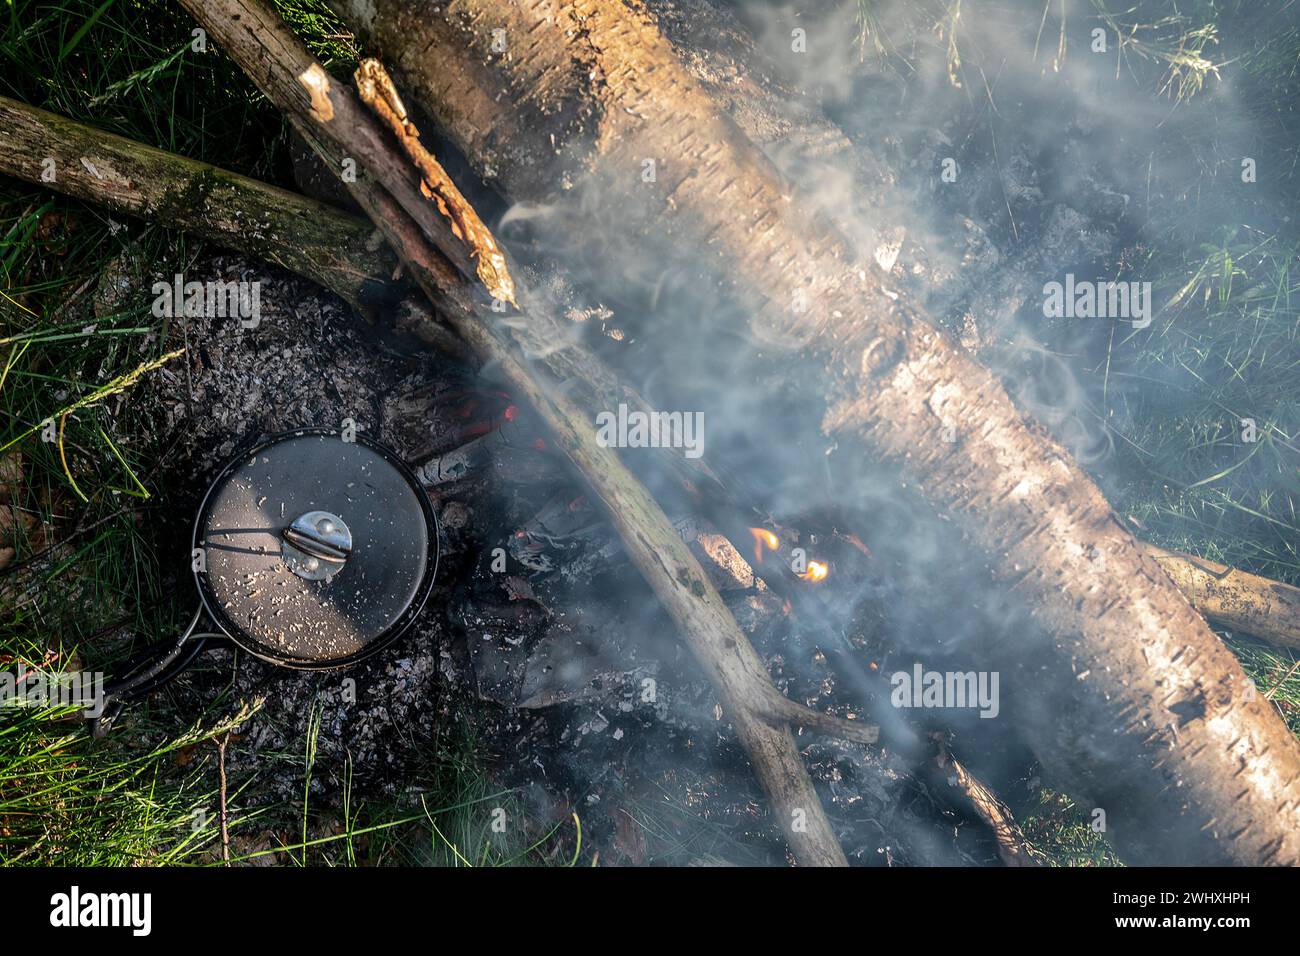 Camp cooking on fire Stock Photo